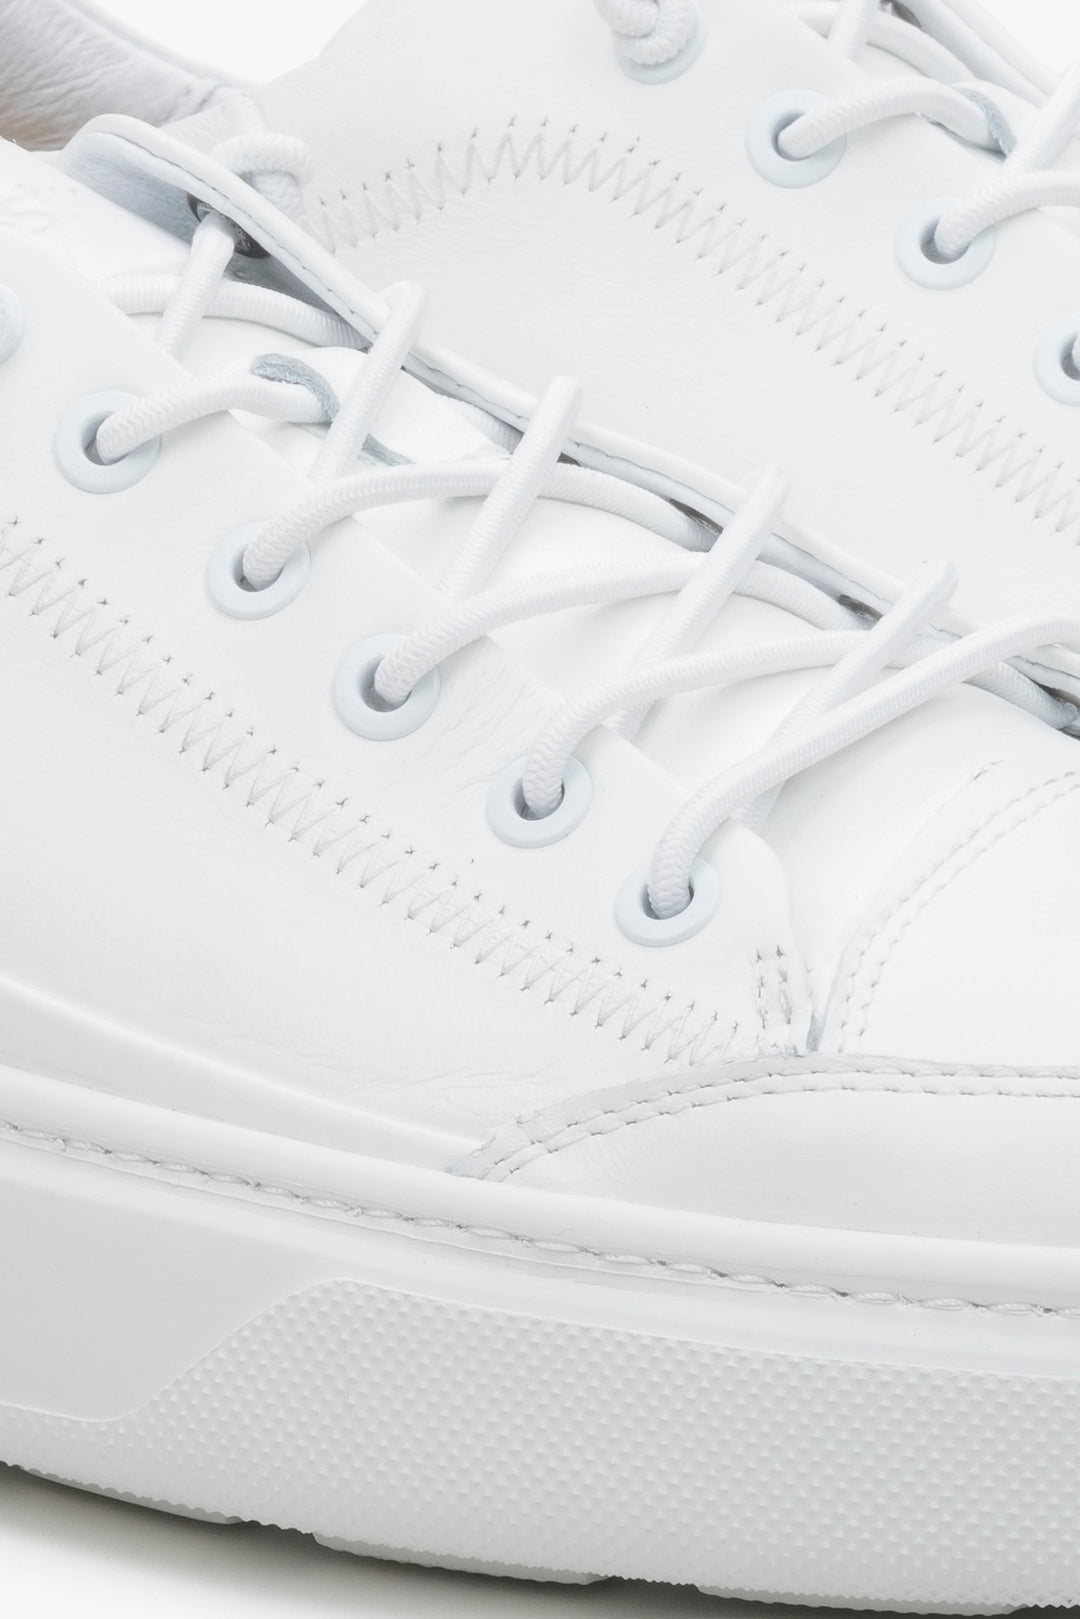 Men's white sneakers sneakers by Estro - close-up on details.